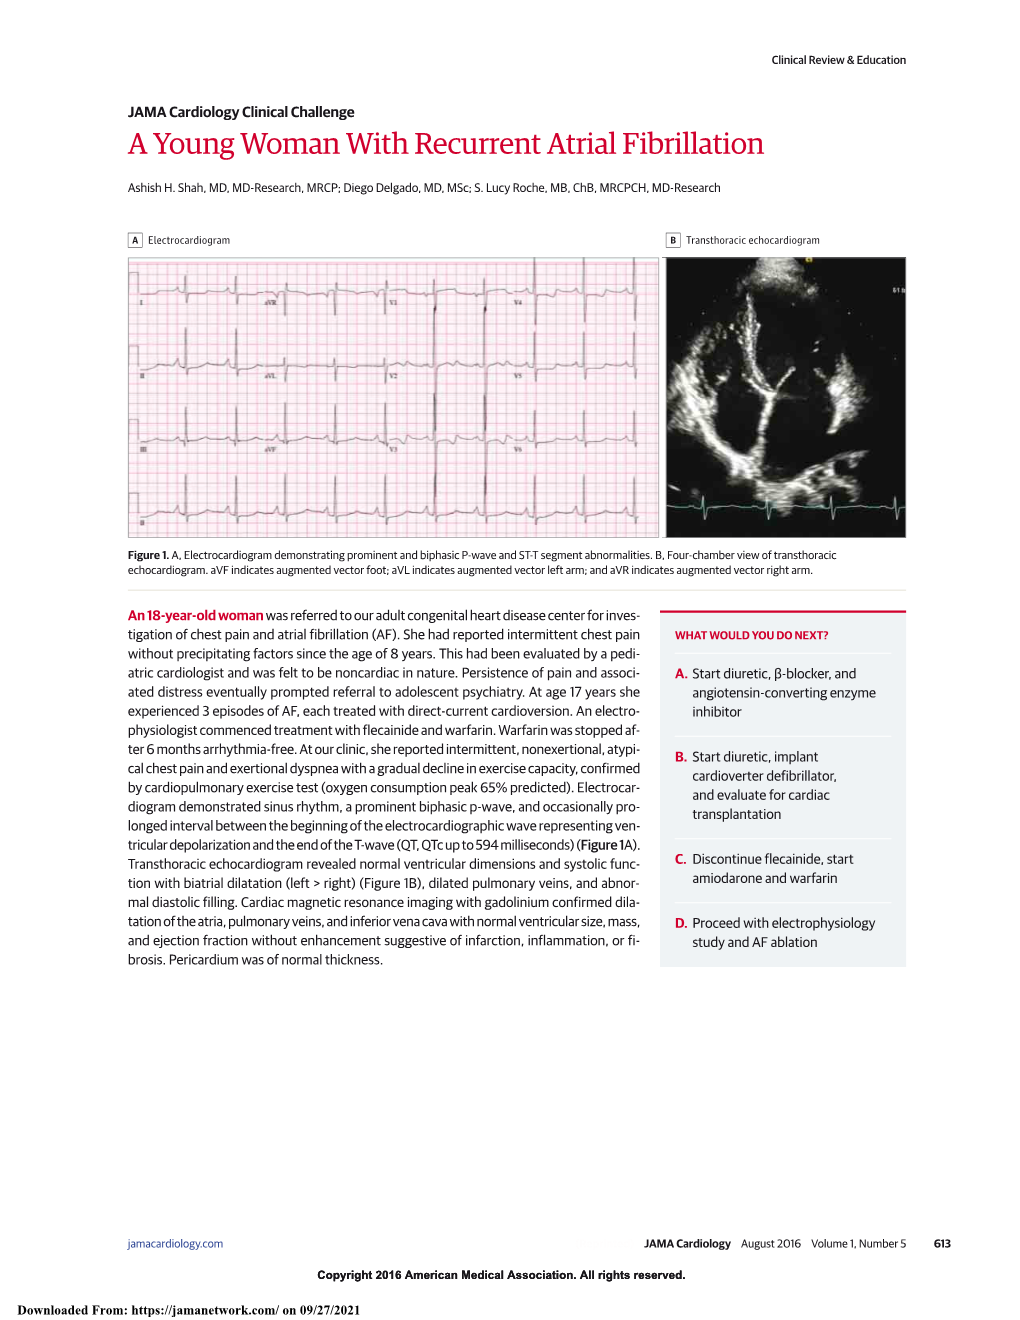 A Young Woman with Recurrent Atrial Fibrillation